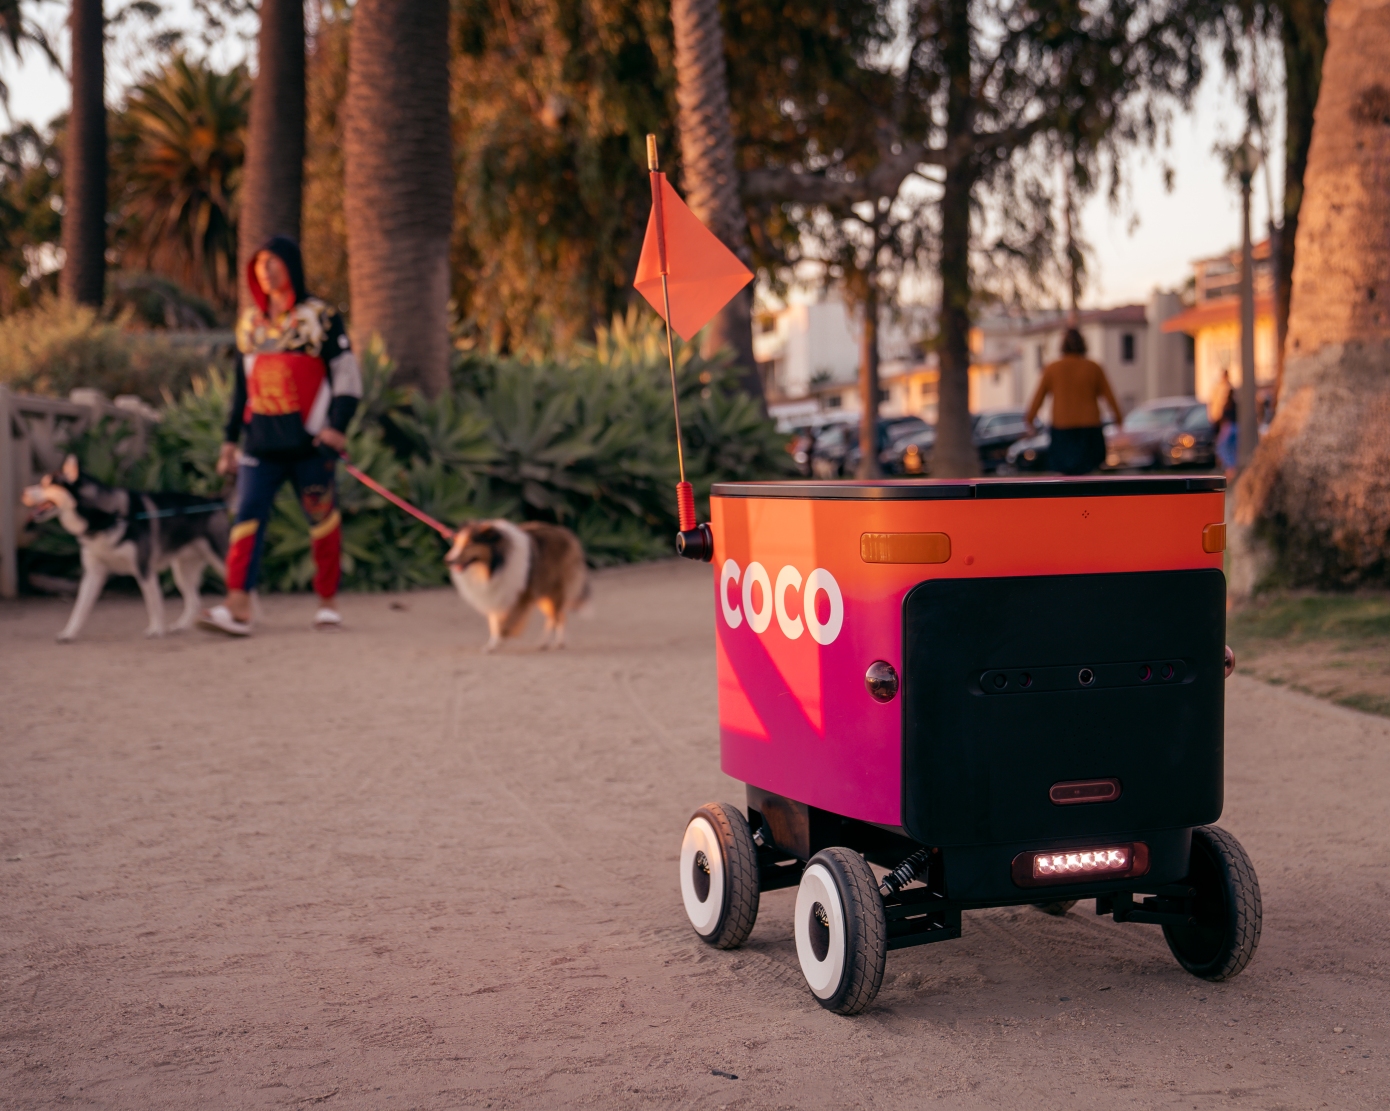 TechCrunch: Segway makes its first foray into sidewalk robot delivery with Coco partnership